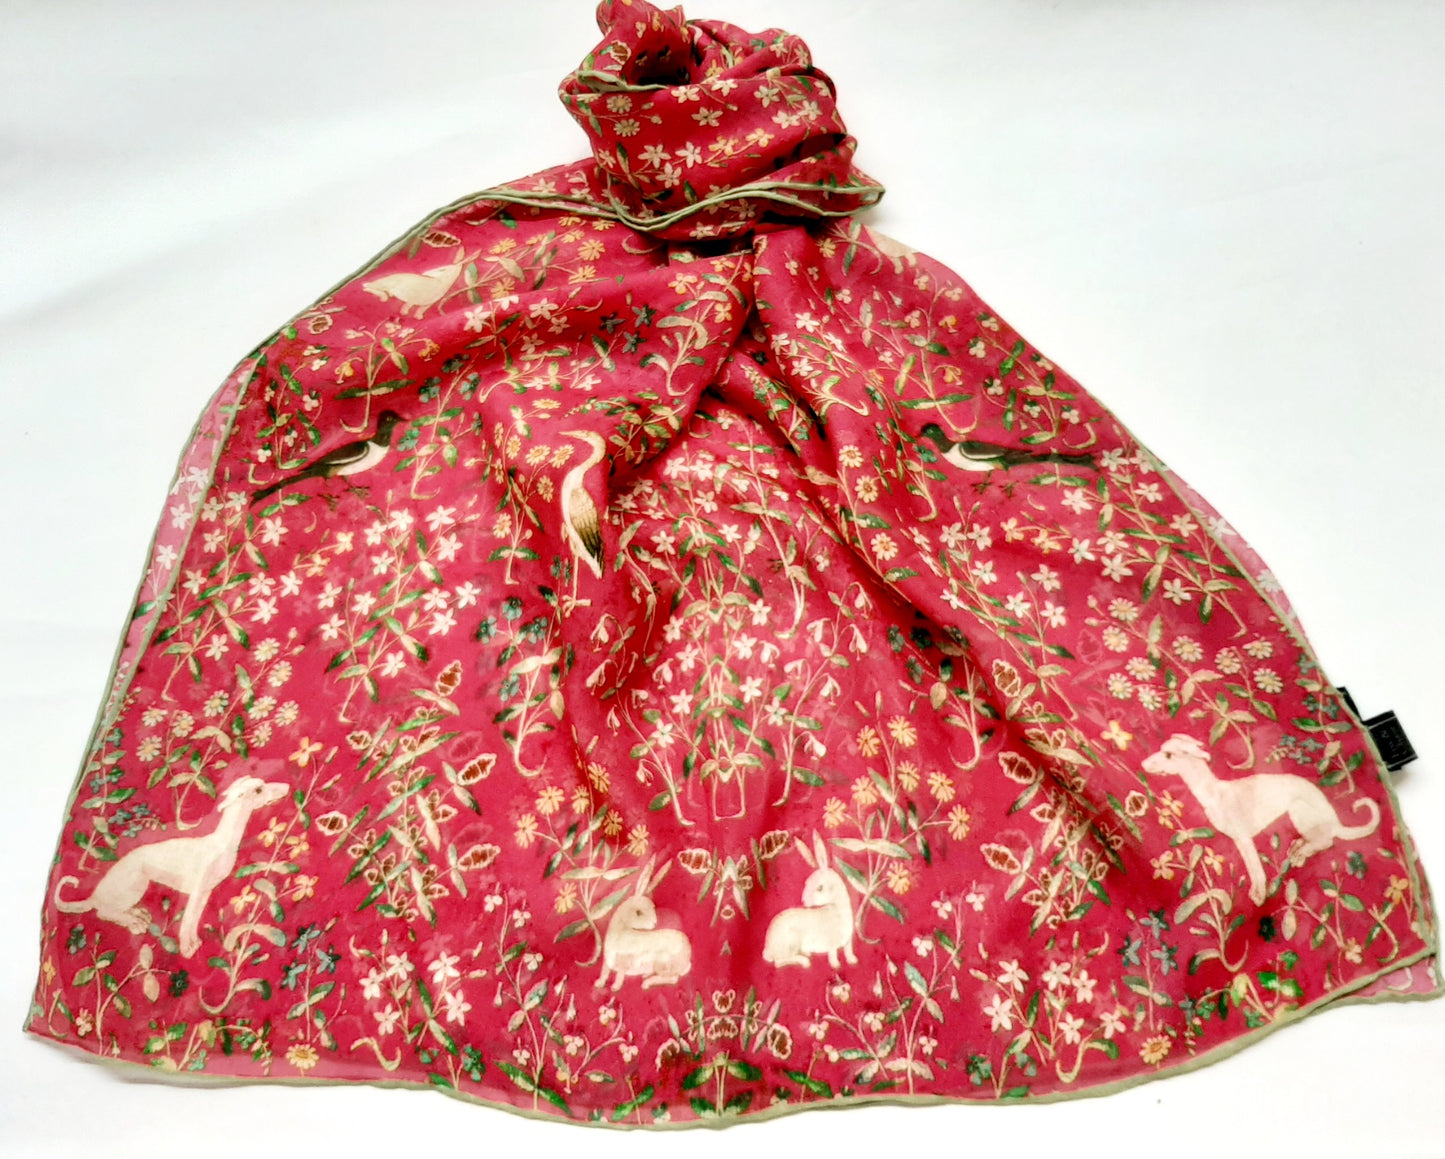 Pure Silk Cluny Tapestry Scarf featuring hounds